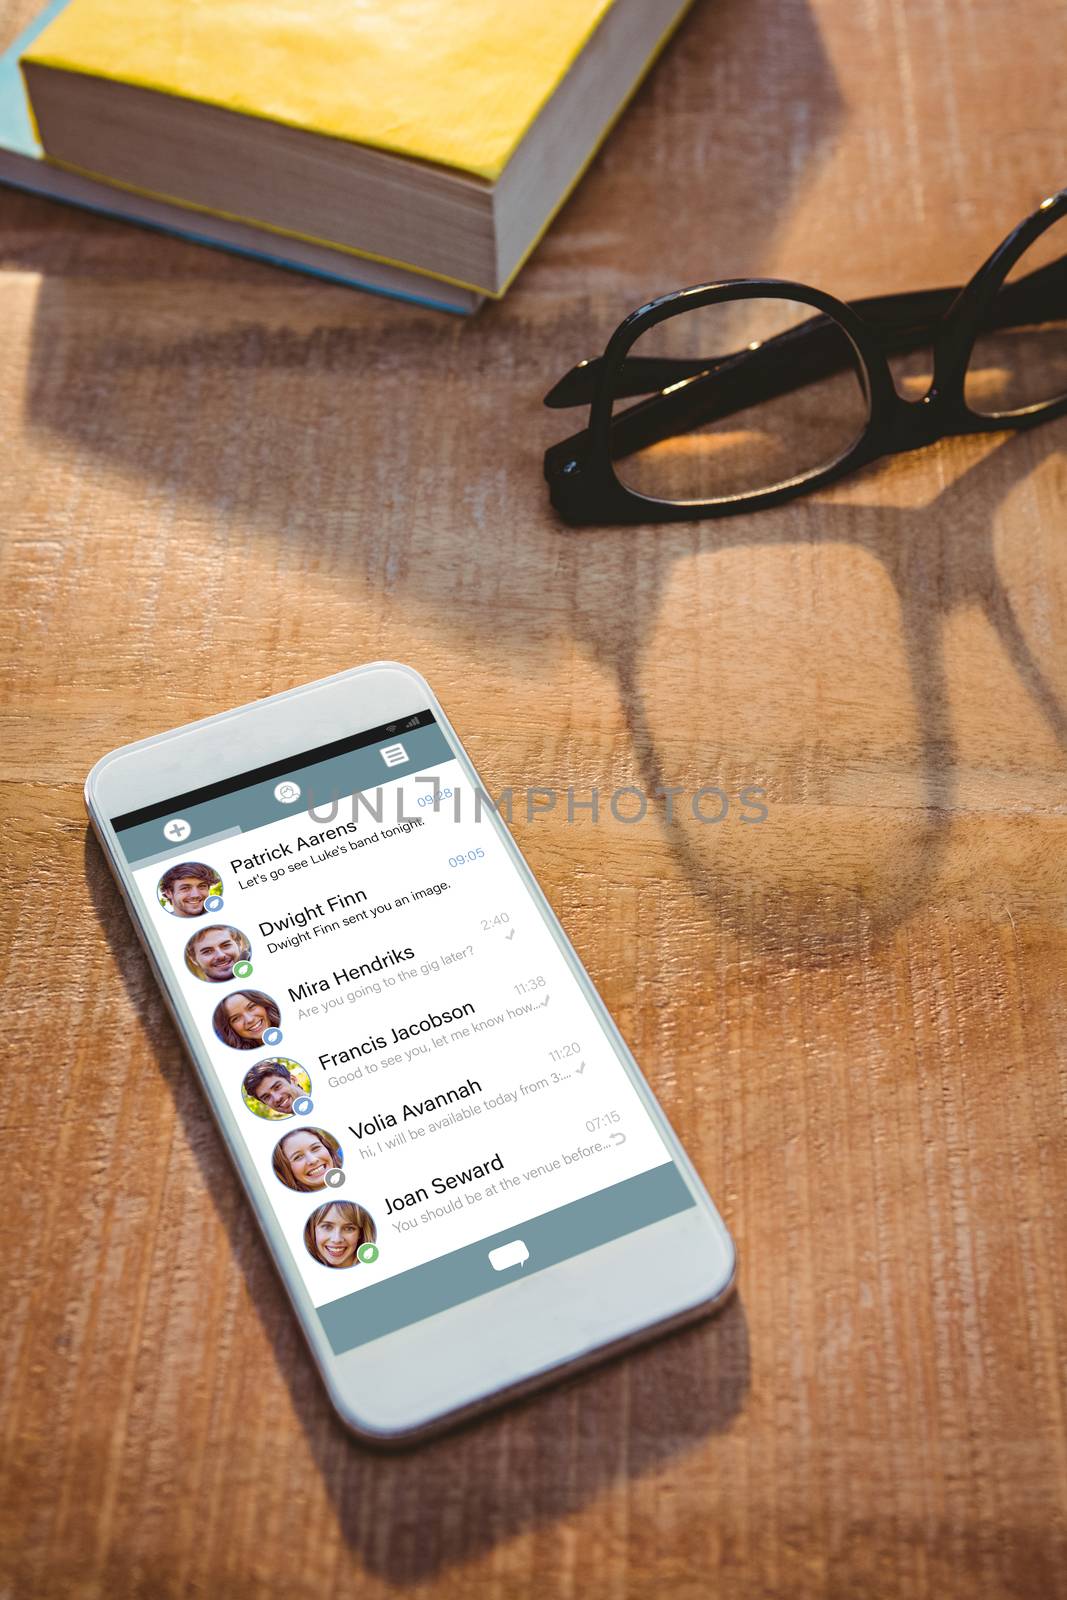 Smartphone app menu against close up view of smartphone and glasses